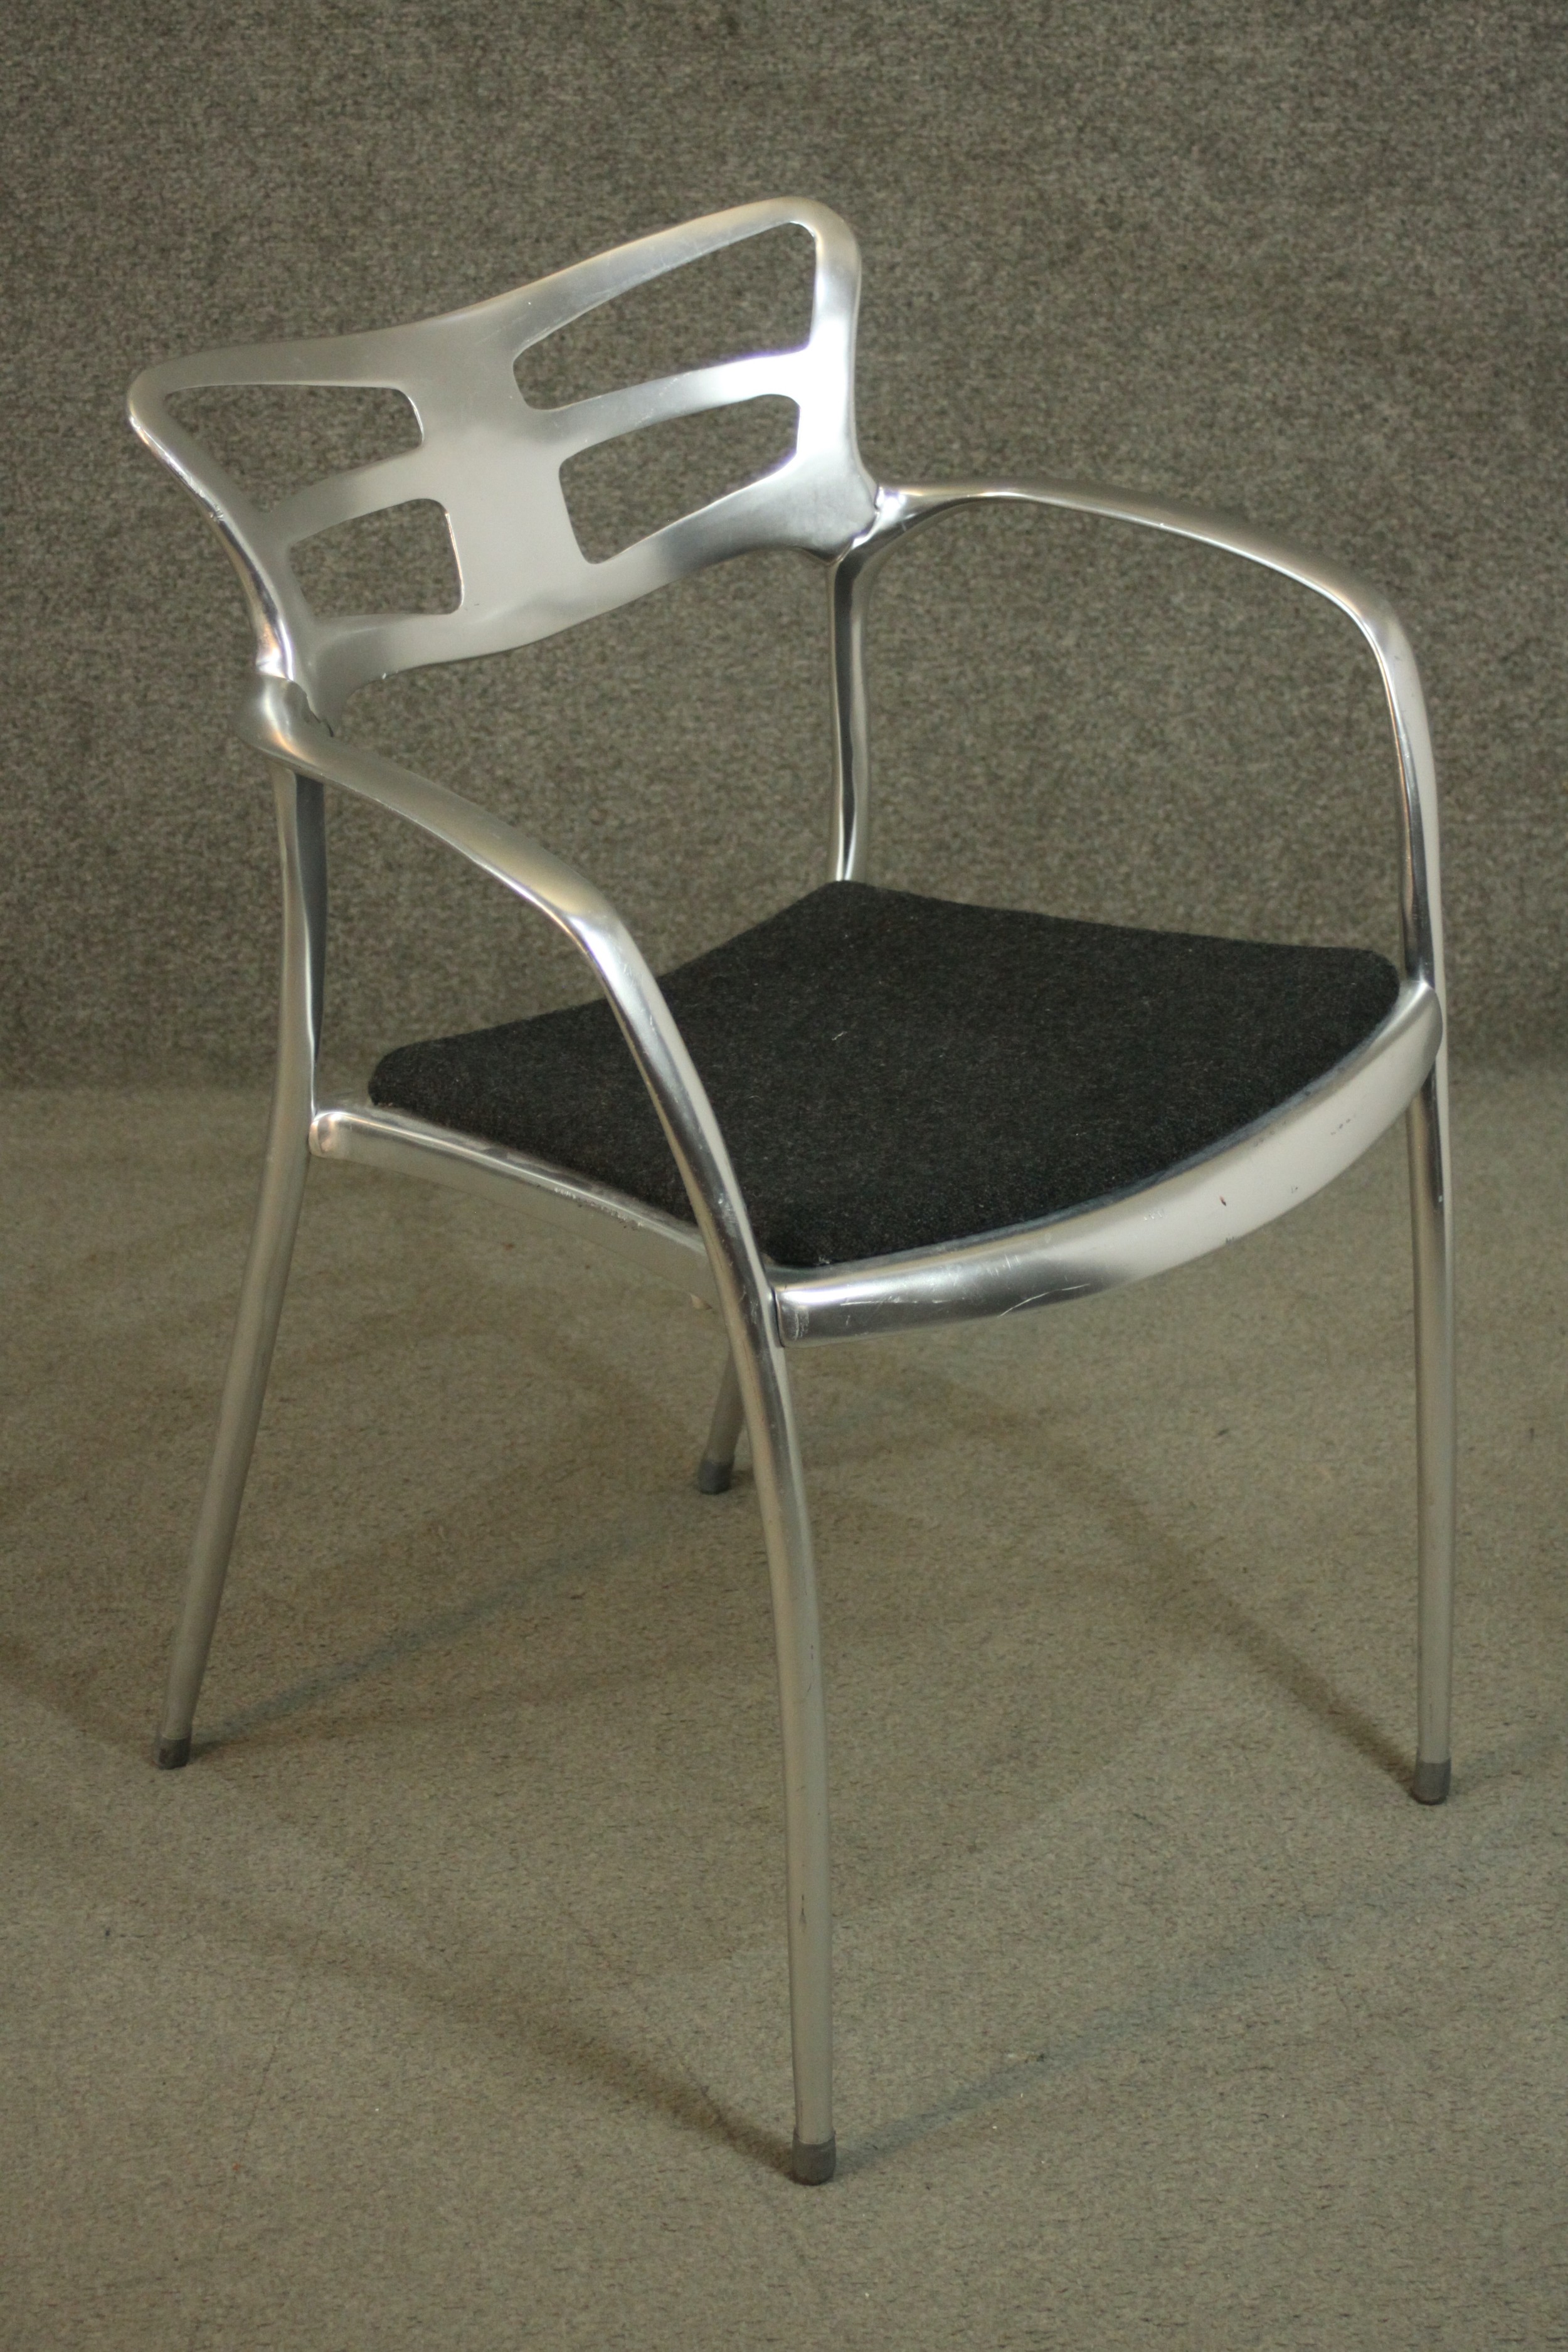 A Liceo chair by Alutec, made from cast aluminum, with open arms, and a dark grey upholstered